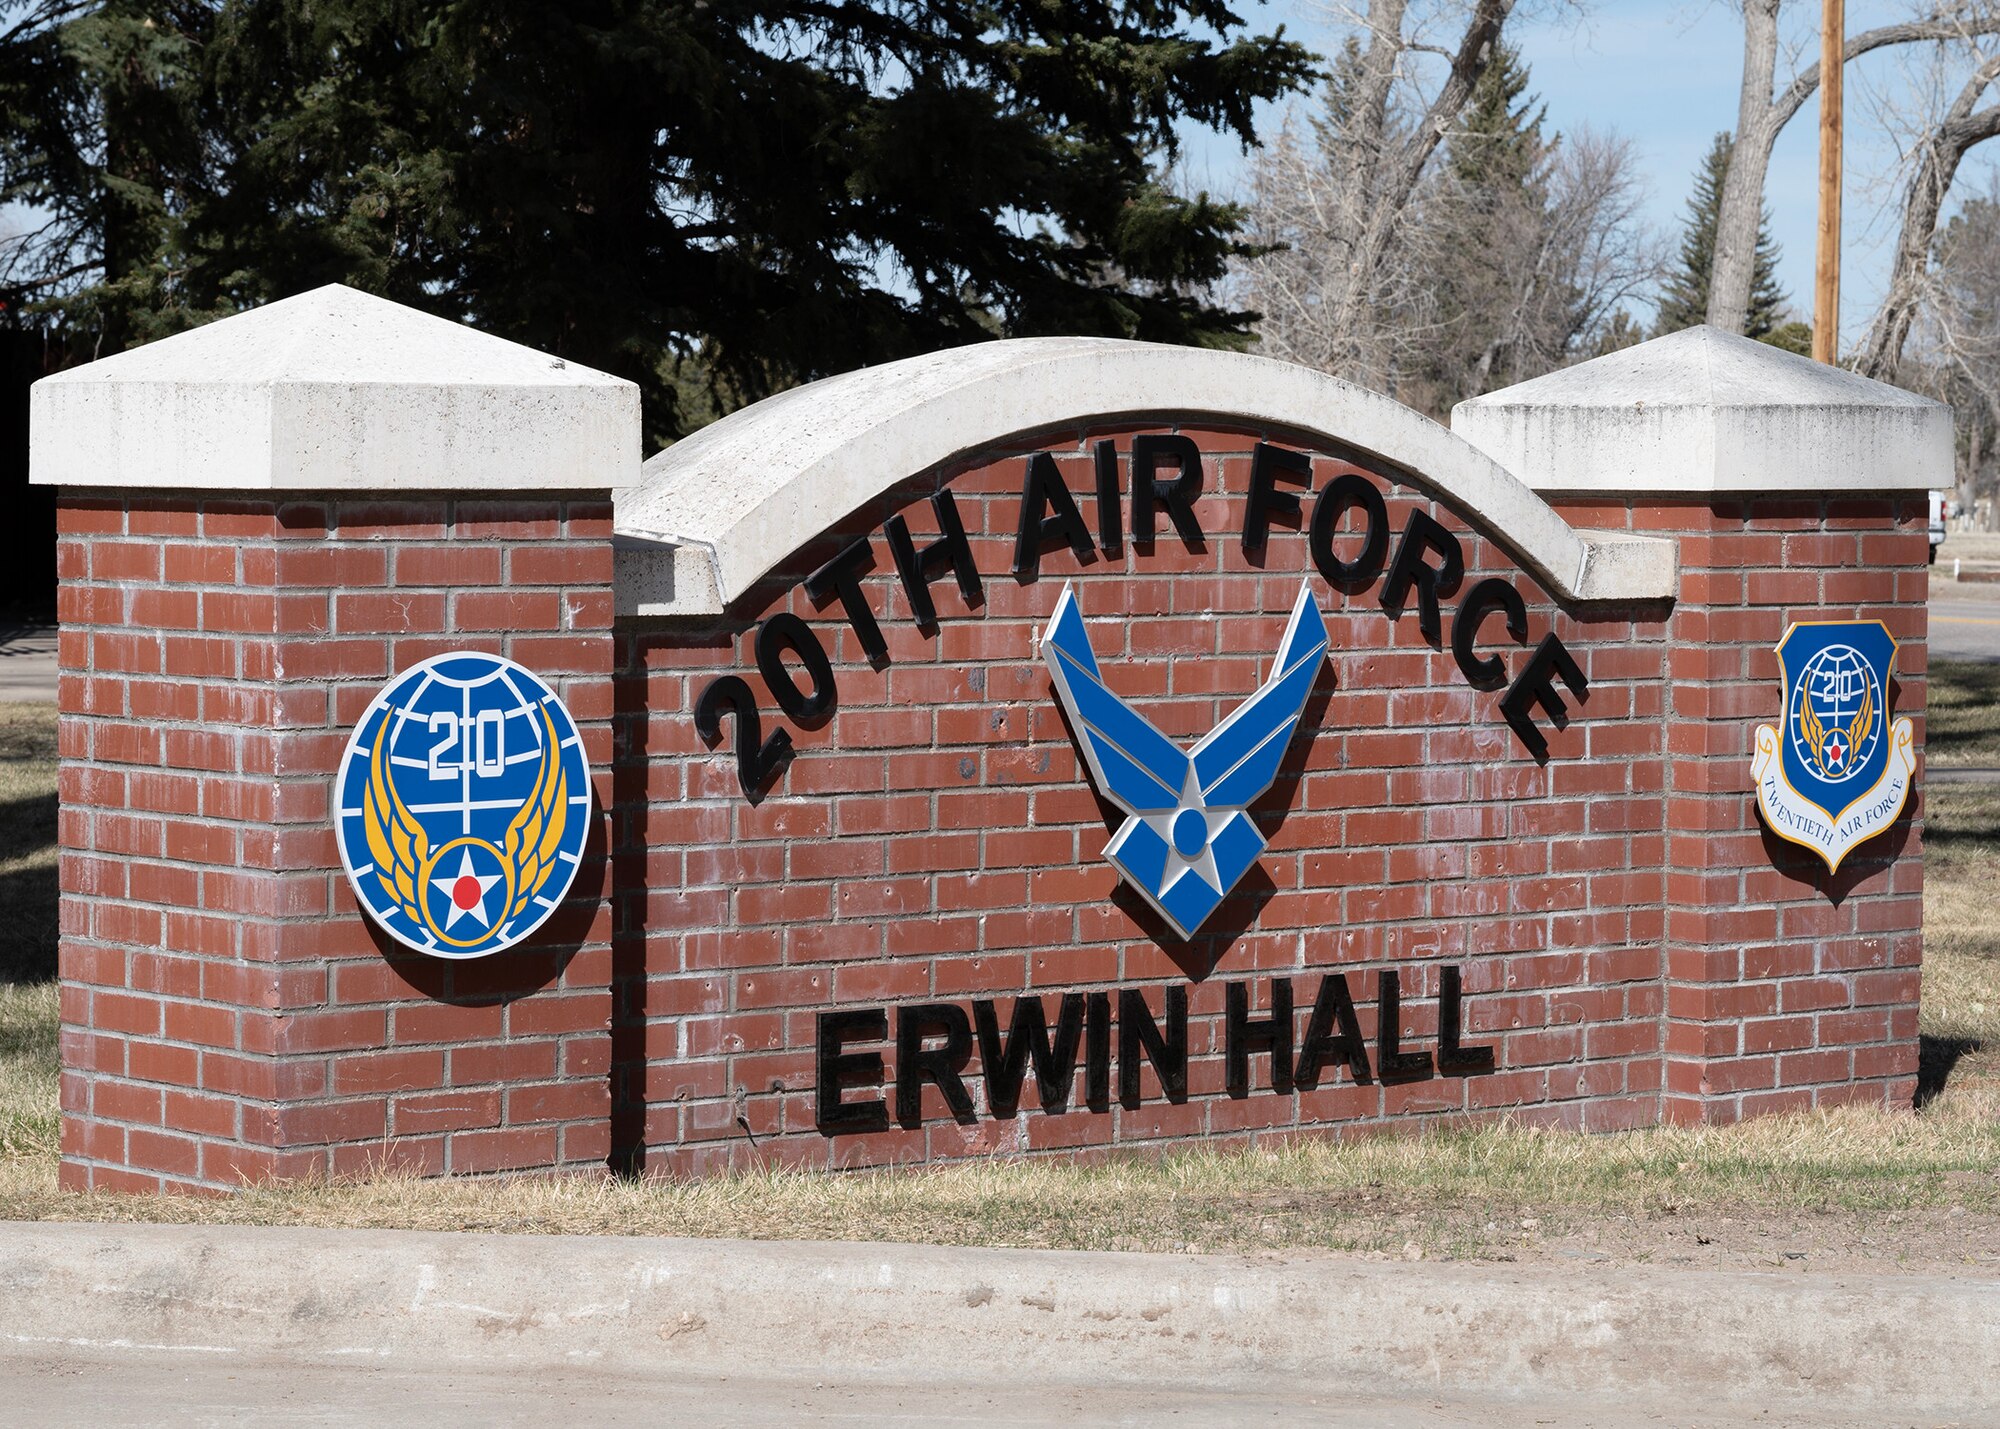 brick sign on grass, displaying 20th Air Force logo and Erwin Hall in black letters